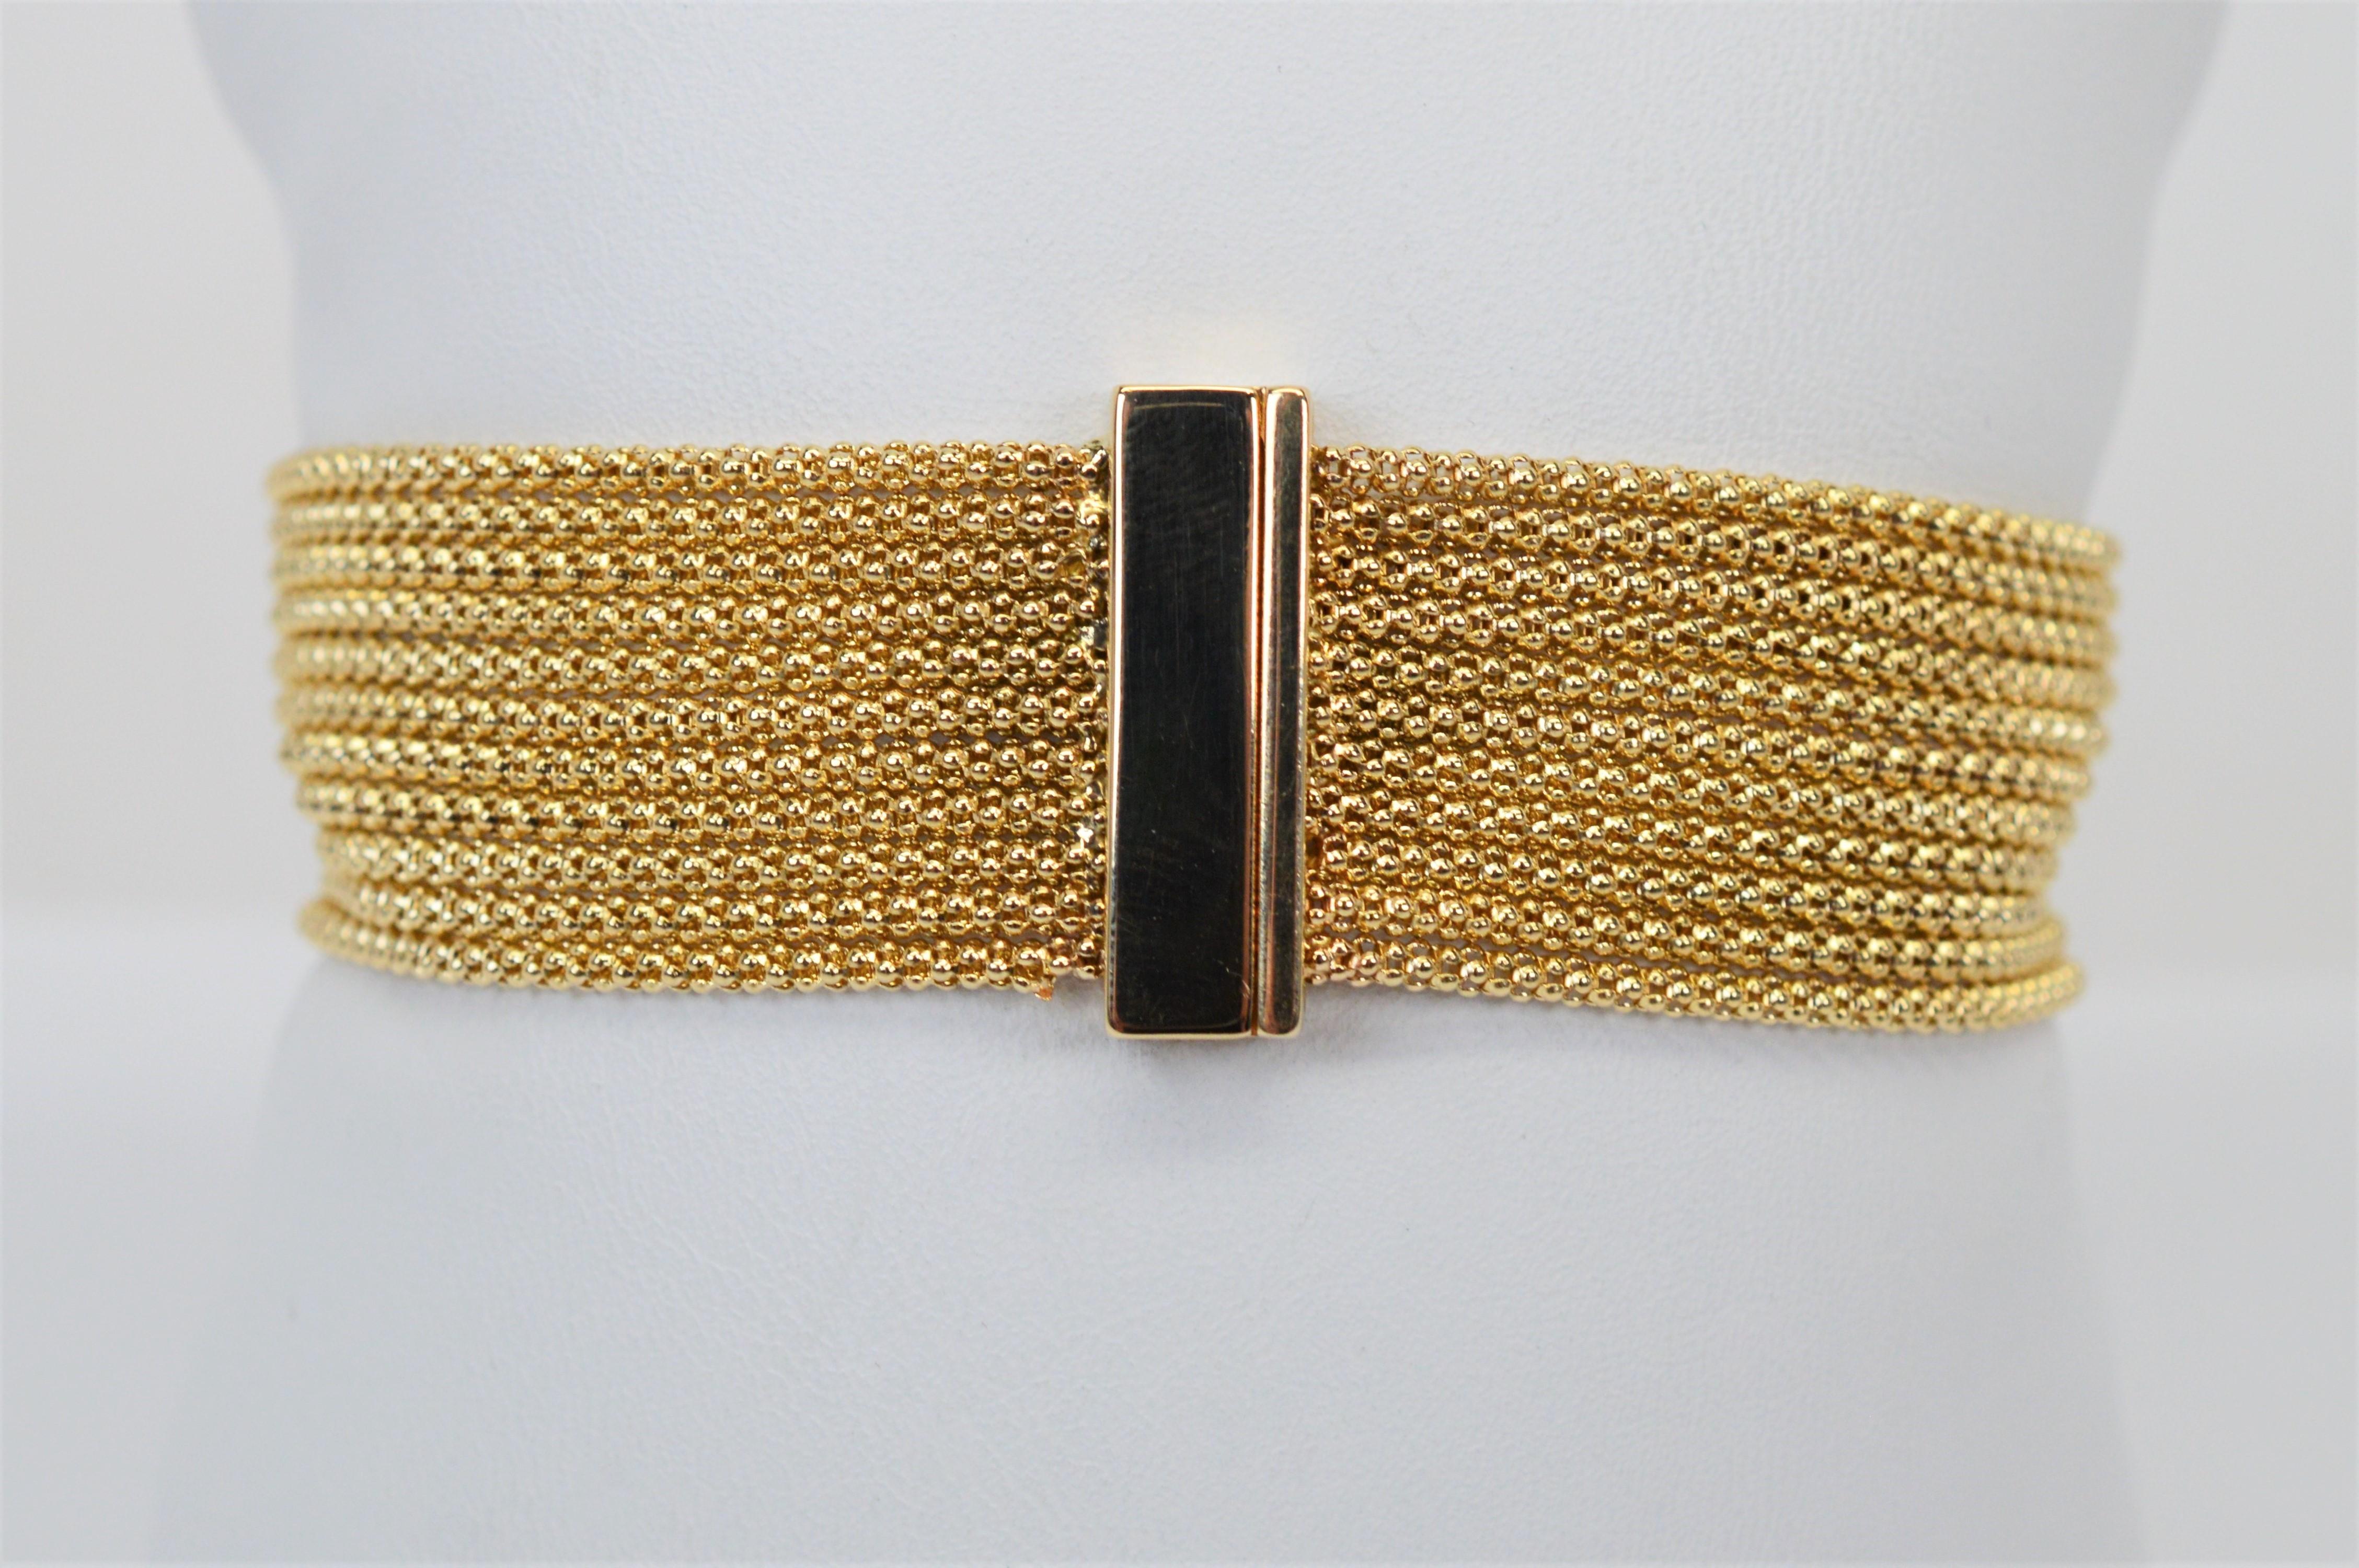 Eleven strands of fourteen karat 14k yellow gold mesh chain fluidly drape the wrist with understated elegance interrupted only by the sleek fourteen karat 14k gold bar detail which duals as a convenient magnetic closure for this fabulous piece.